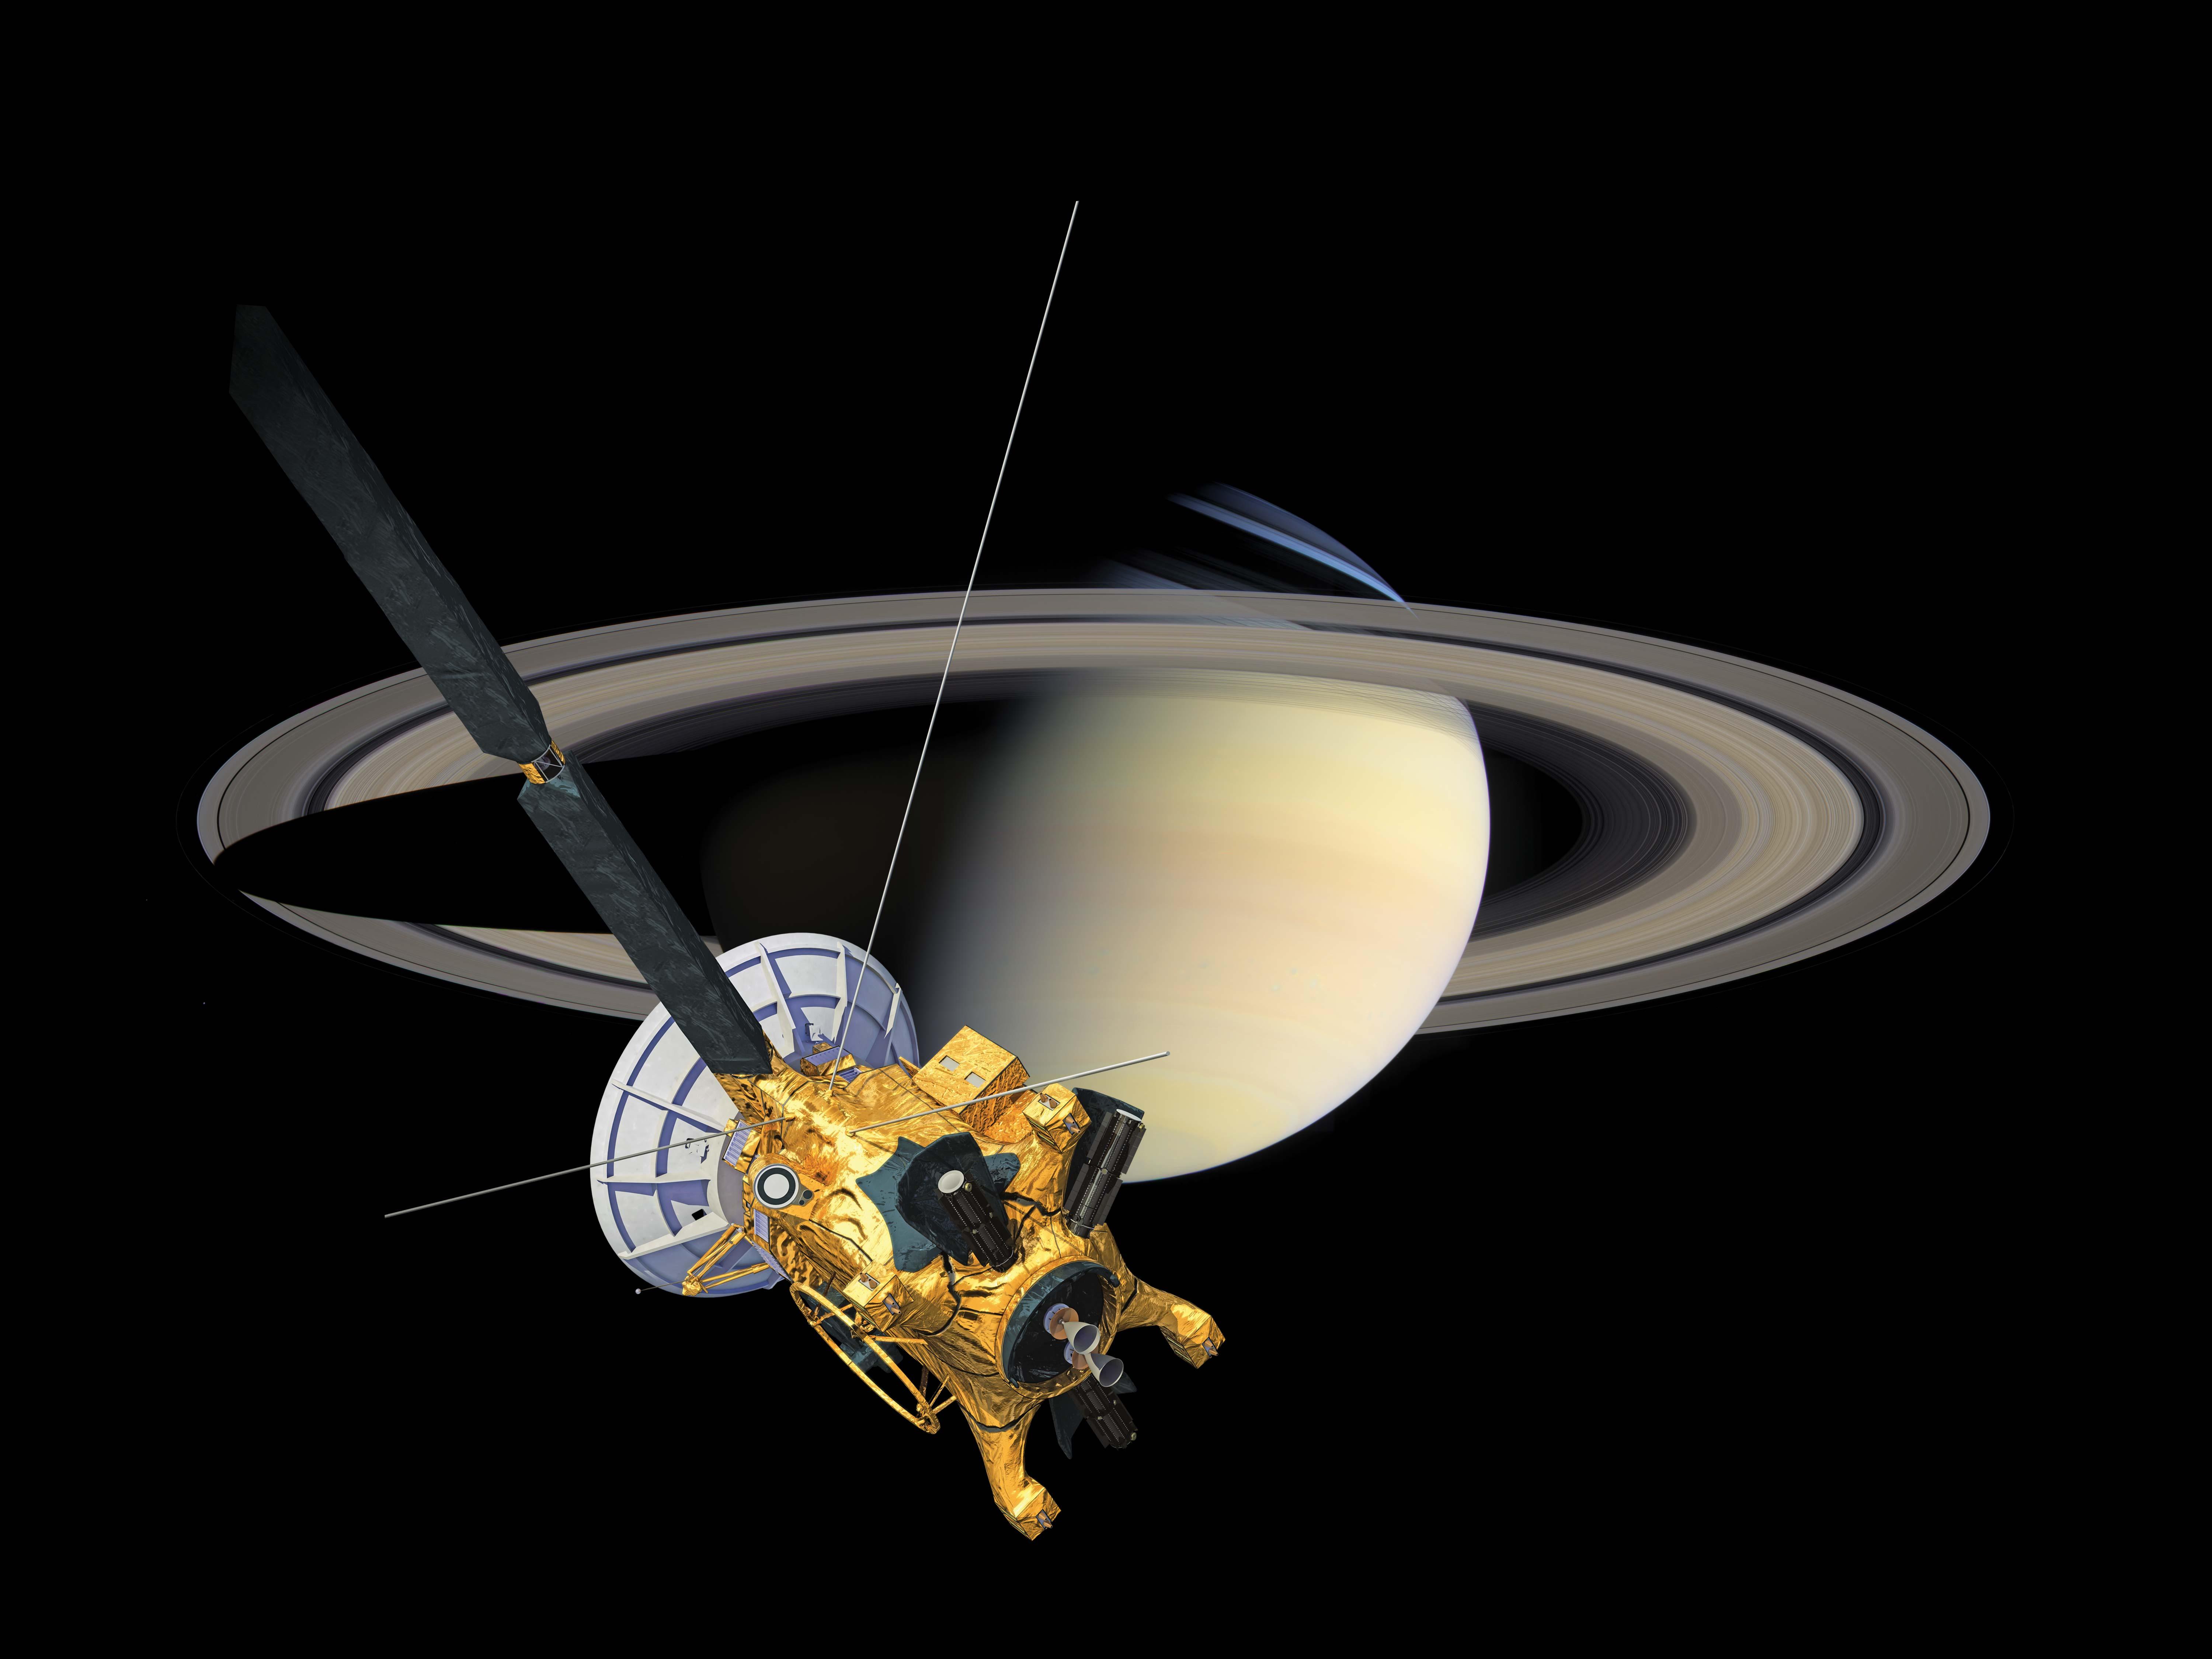 Saturn's shadow passes over its rings as the Cassini spacecraft looks on in this artist's concept.